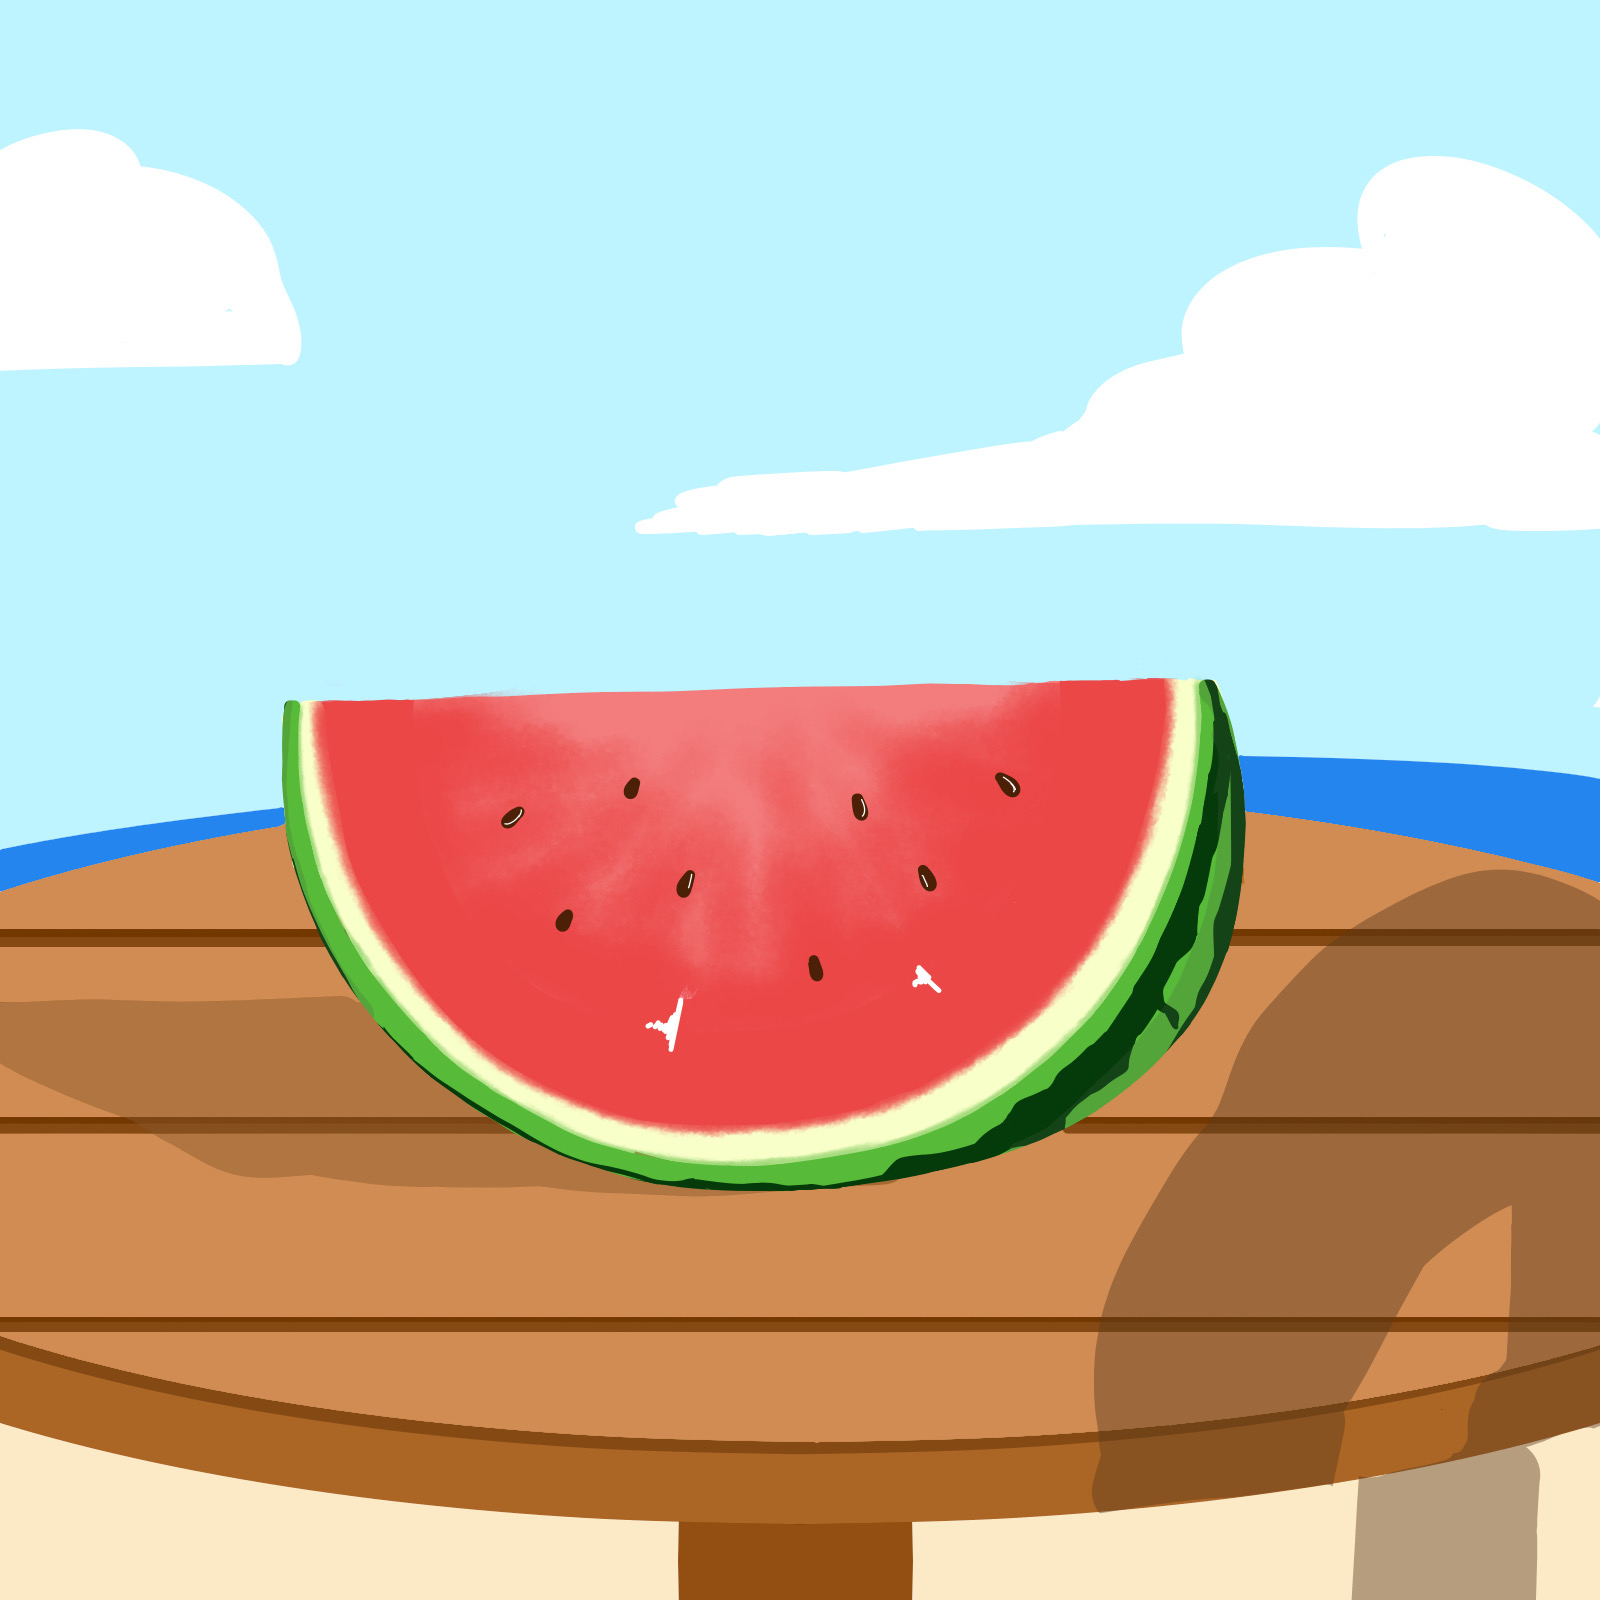 How to draw a cartoon watermelon slice step by step easy - video Dailymotion